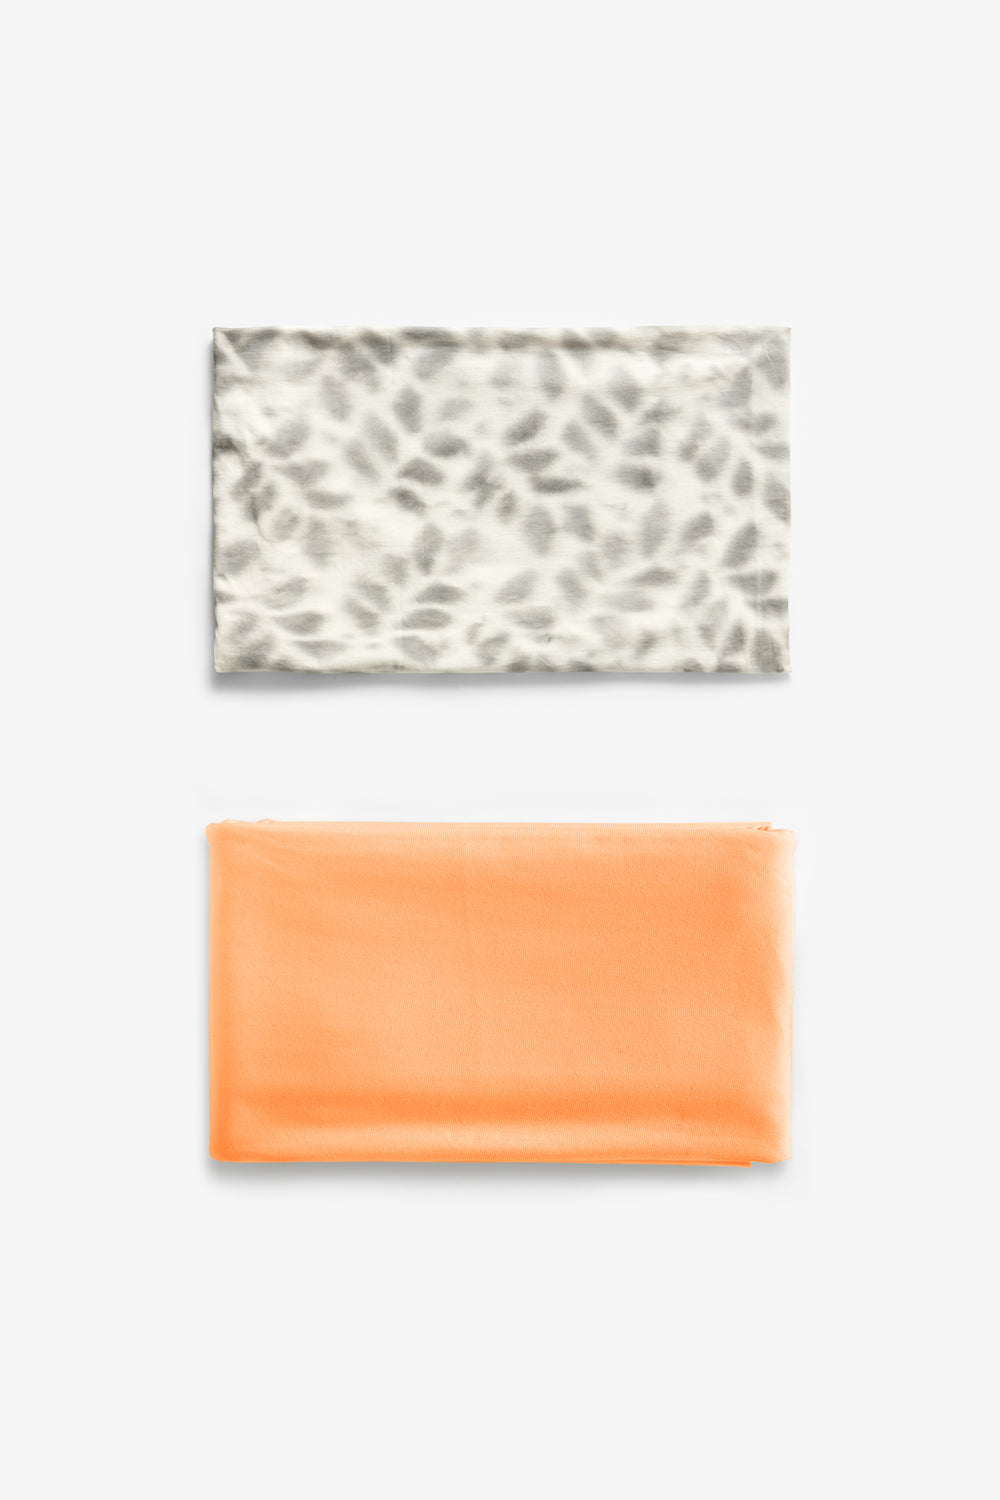 A folded bundle of Faded Bloomers fabric and Salmon fabric.